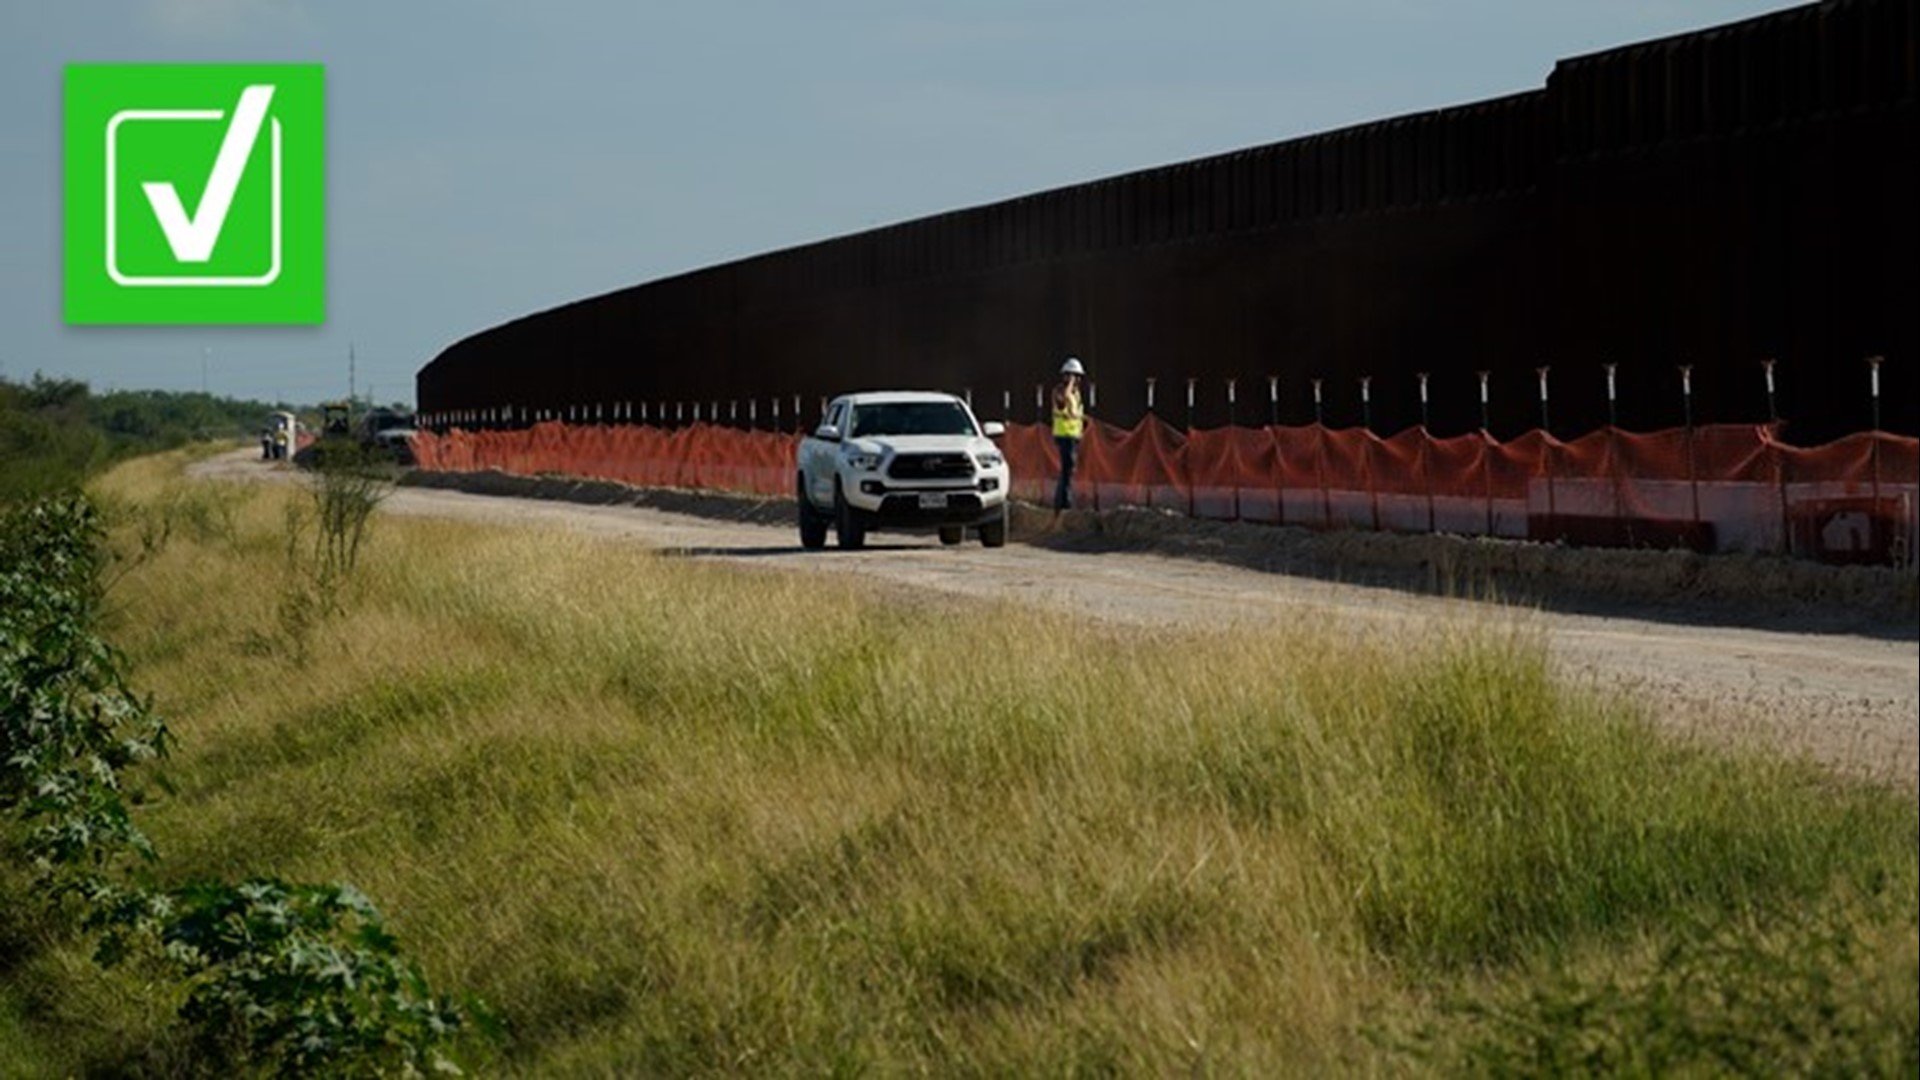 Texas Gov. Greg Abbott recently announced the state plans to build a border wall where the Trump administration left off.